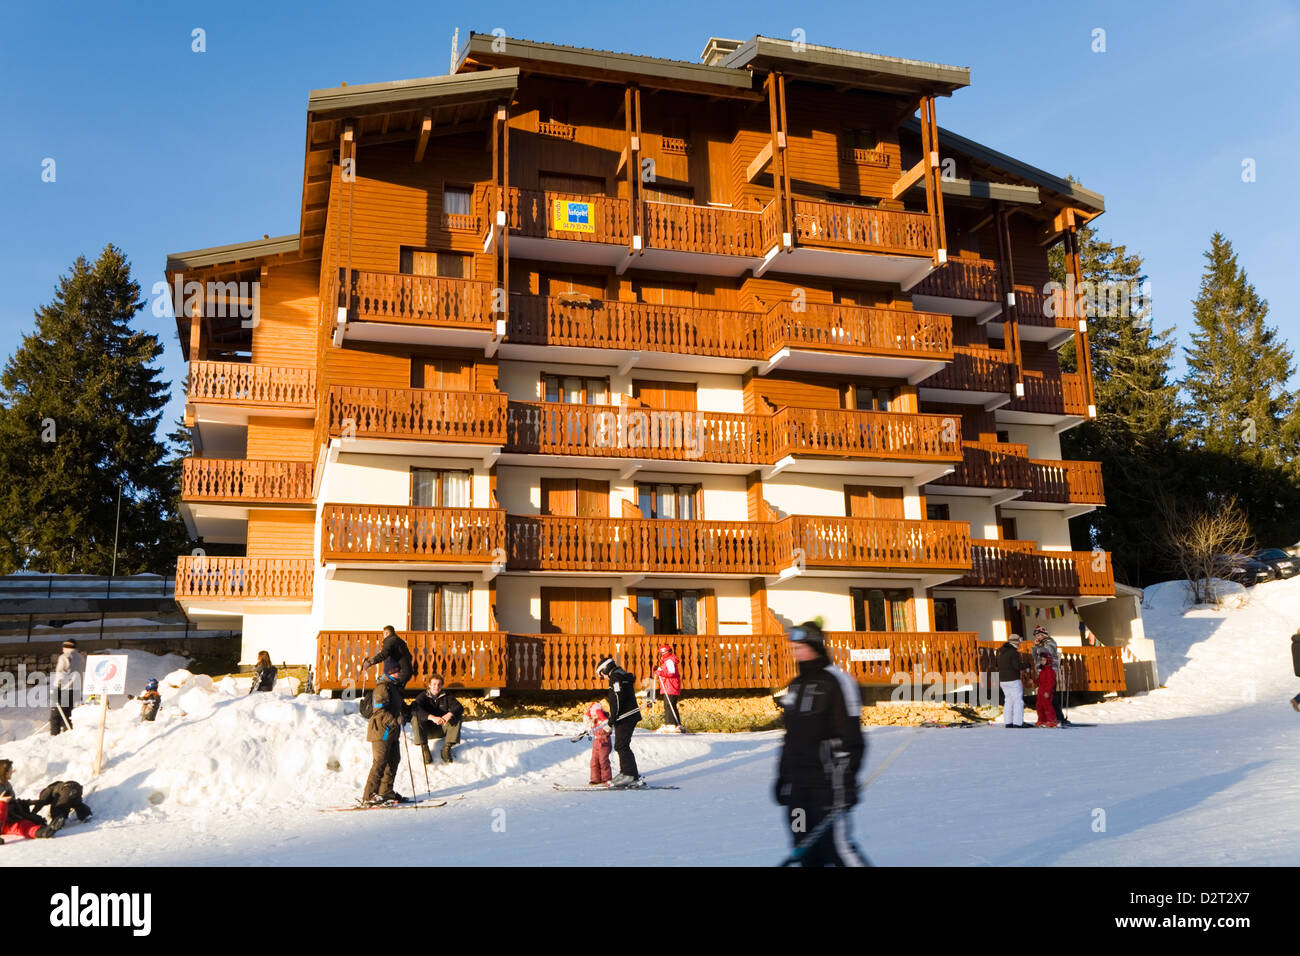 Hotel / ski lodge / skiers' chalet accommodation self catering rental flat  apartment apartments near the slope. Le Revard France Stock Photo - Alamy